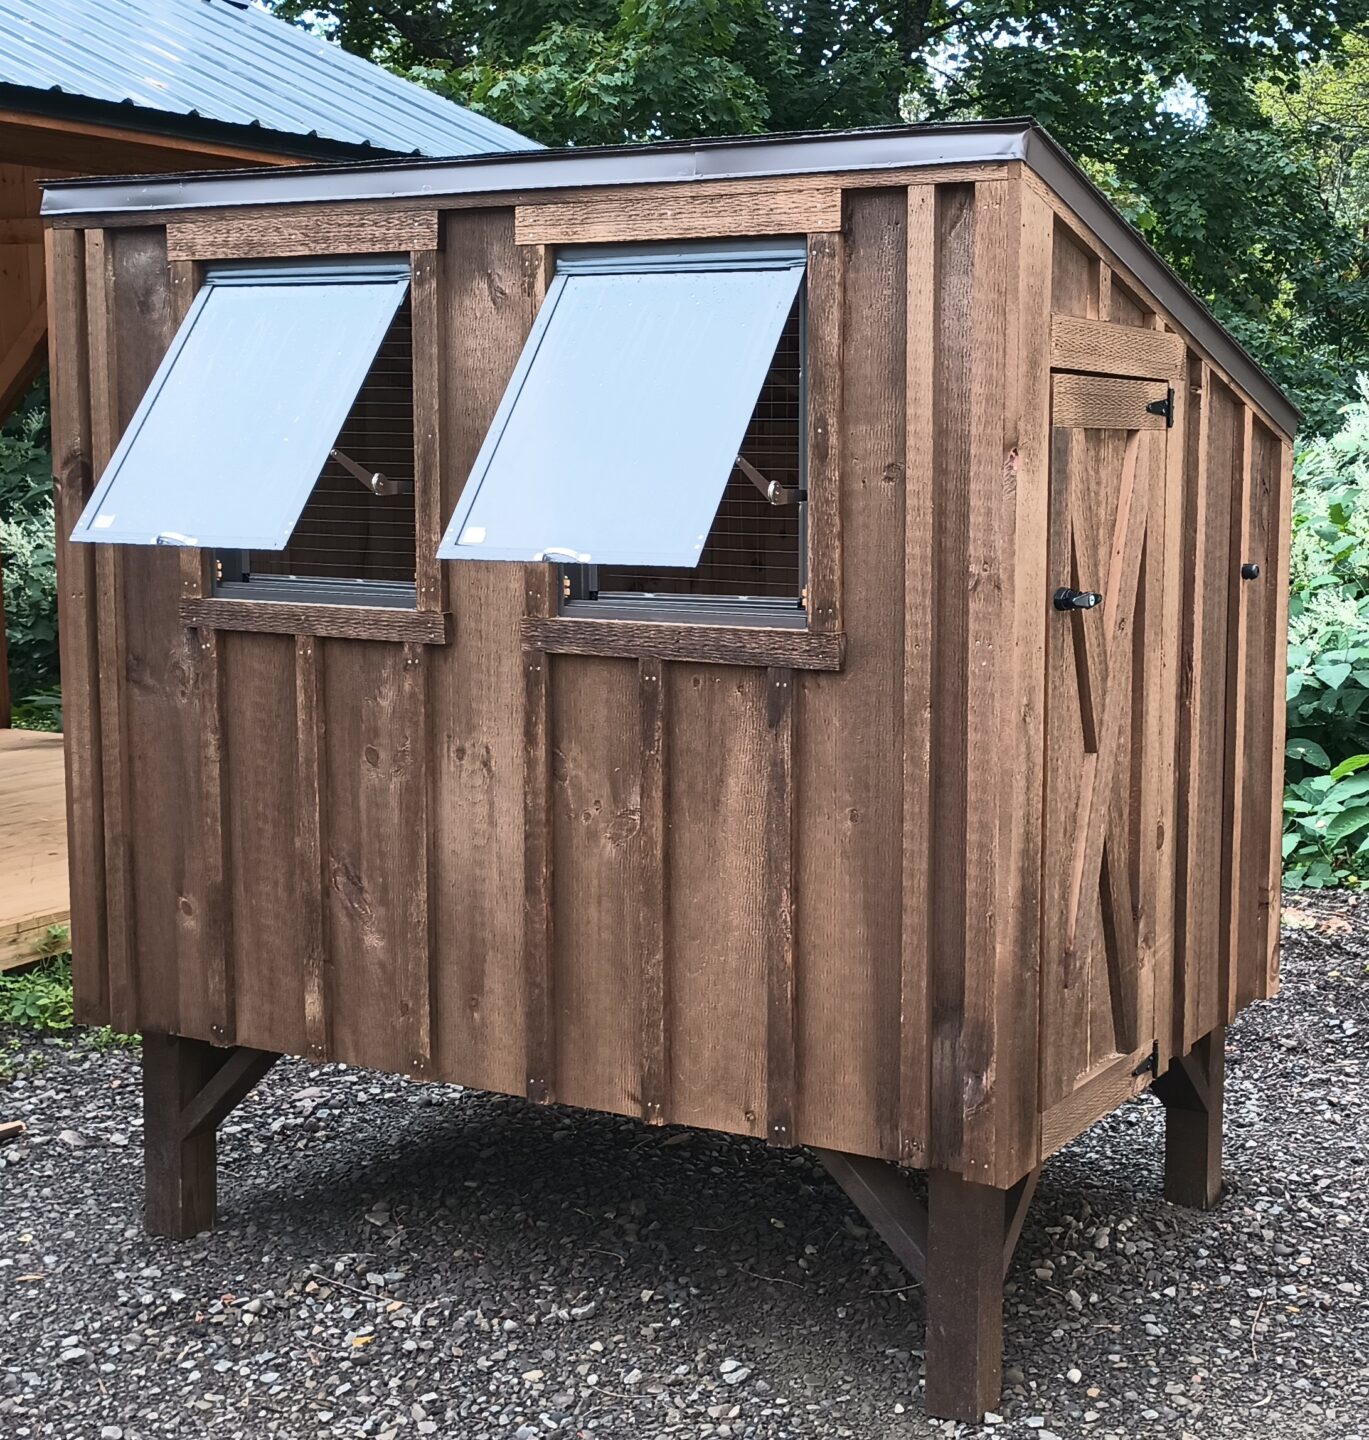 Stained board & batten sided chicken coop with 2 windows